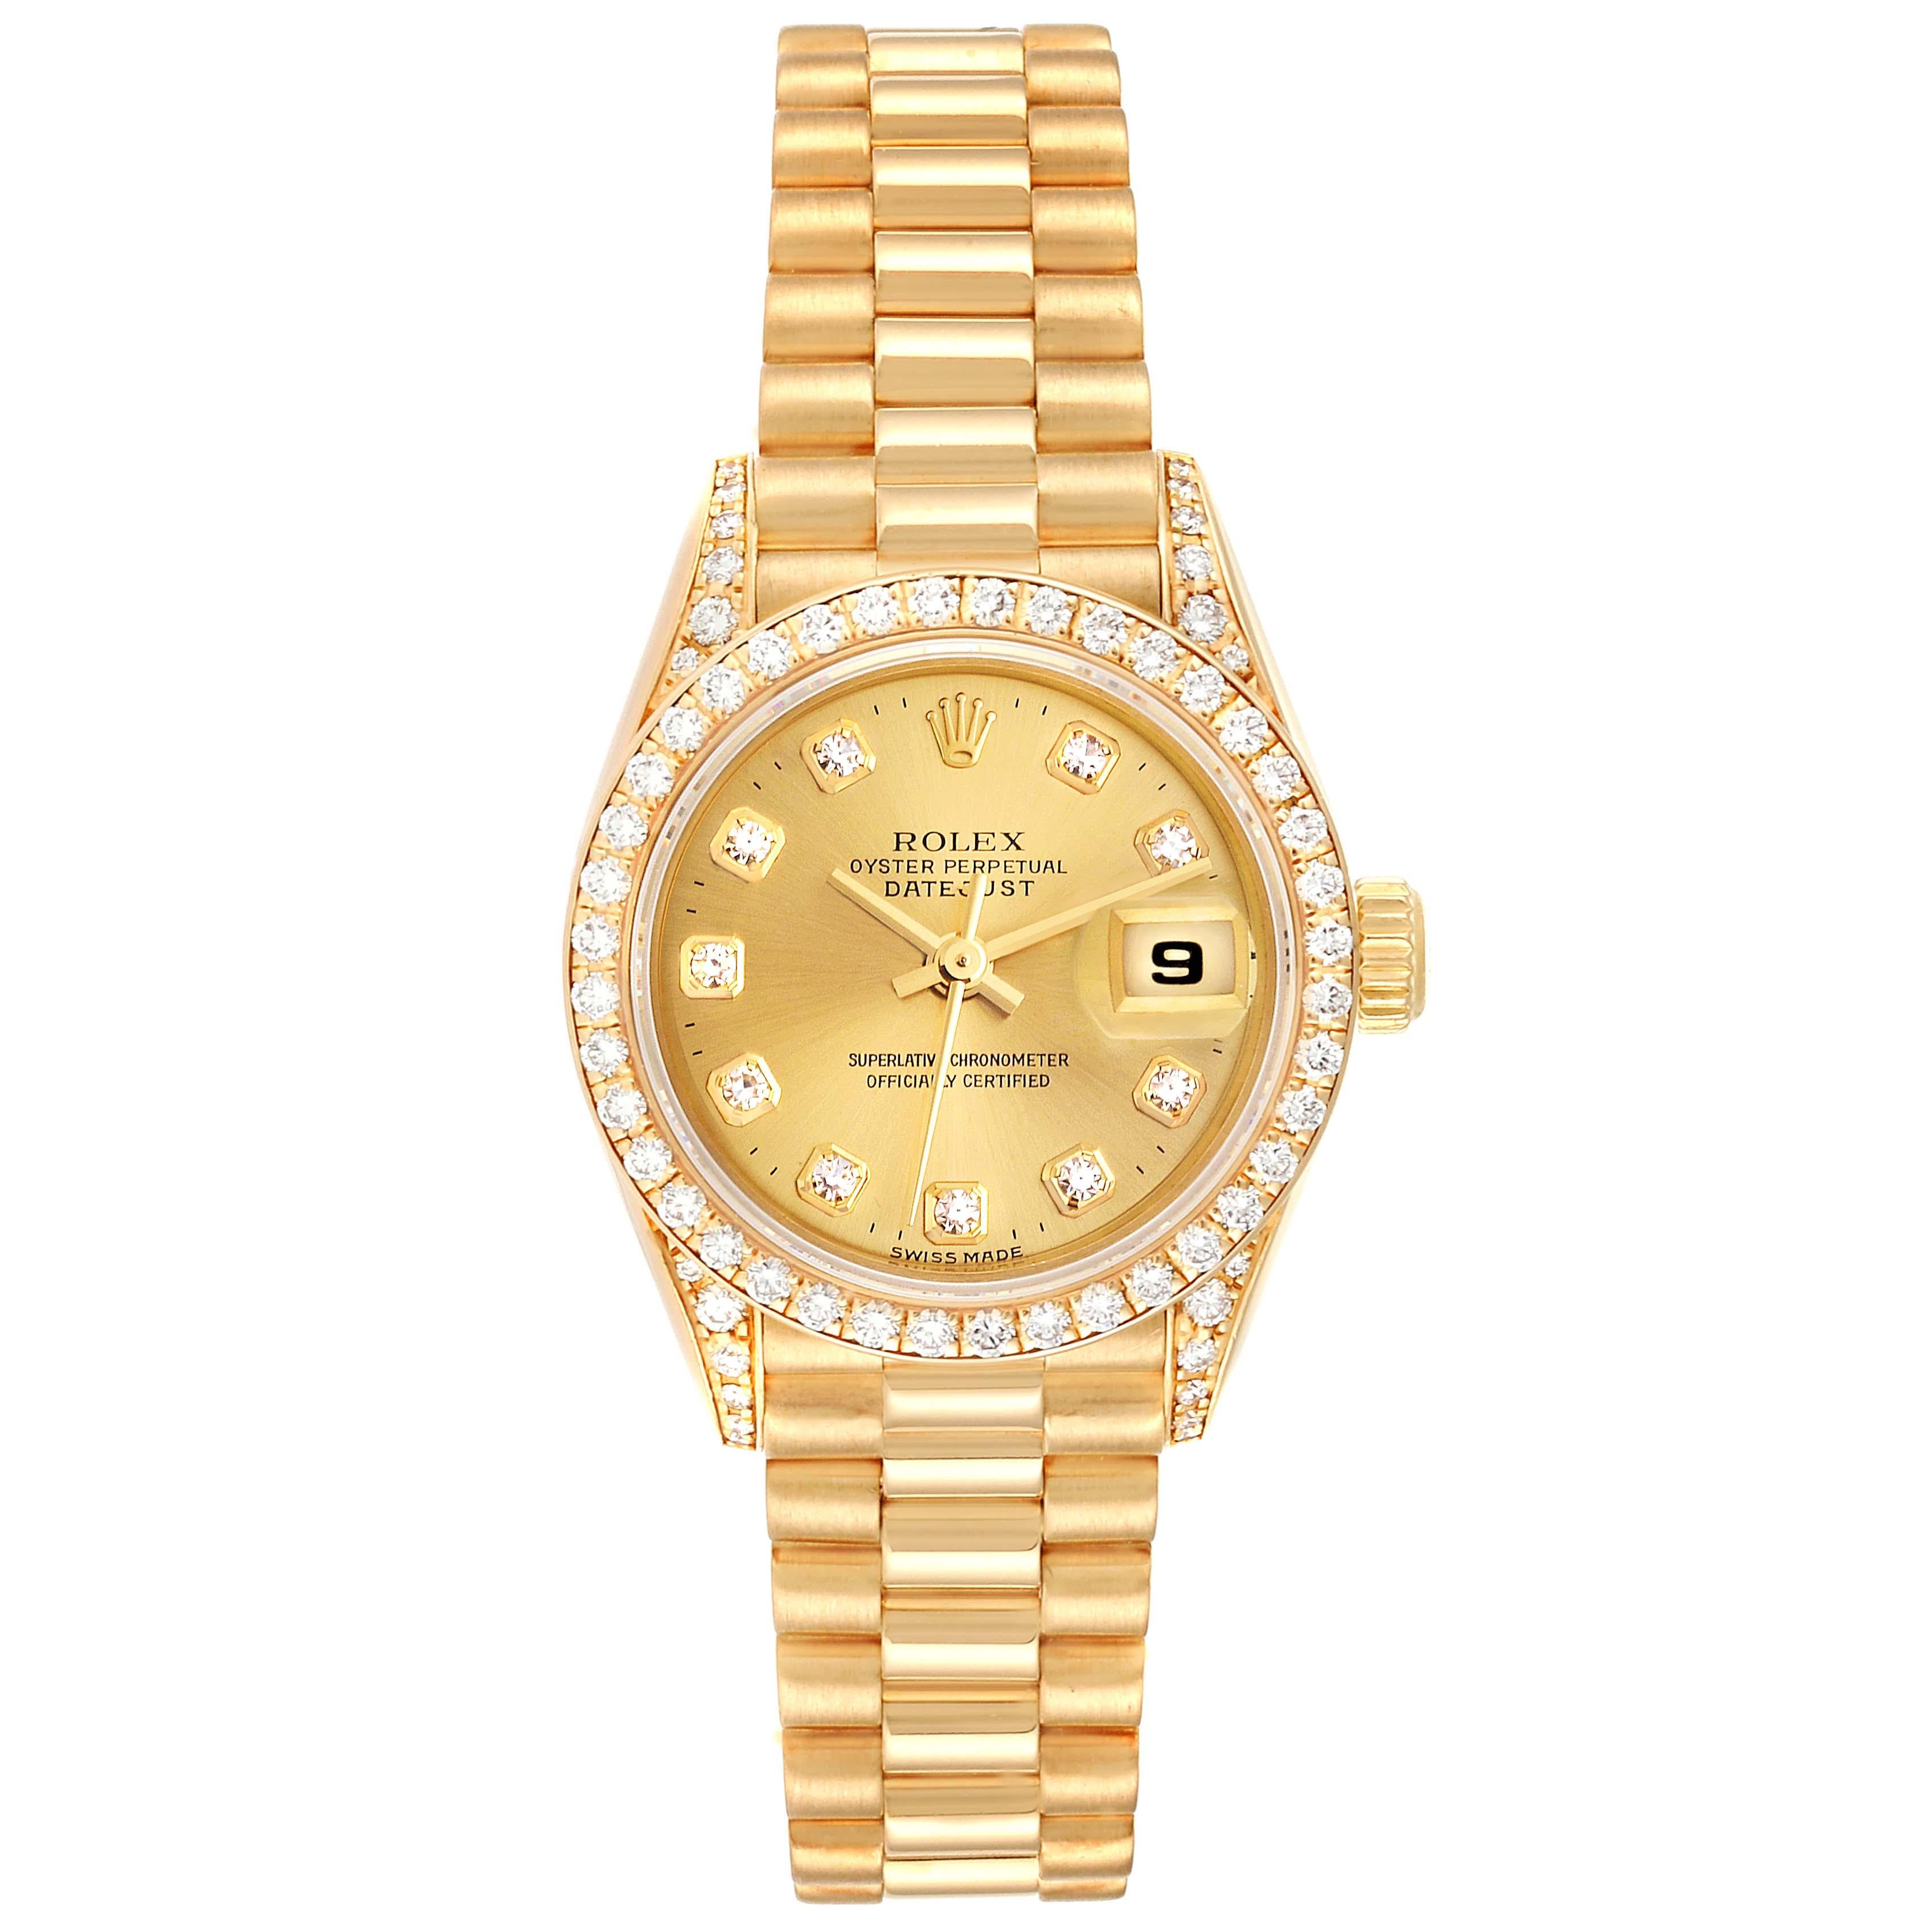 Rolex President Datejust 26mm Yellow Gold Diamond Ladies Watch 69238. Officially certified chronometer self-winding movement. 18k yellow gold oyster case 26.0 mm in diameter. Rolex logo on a crown. Original Rolex factory diamond lugs. Original Rolex